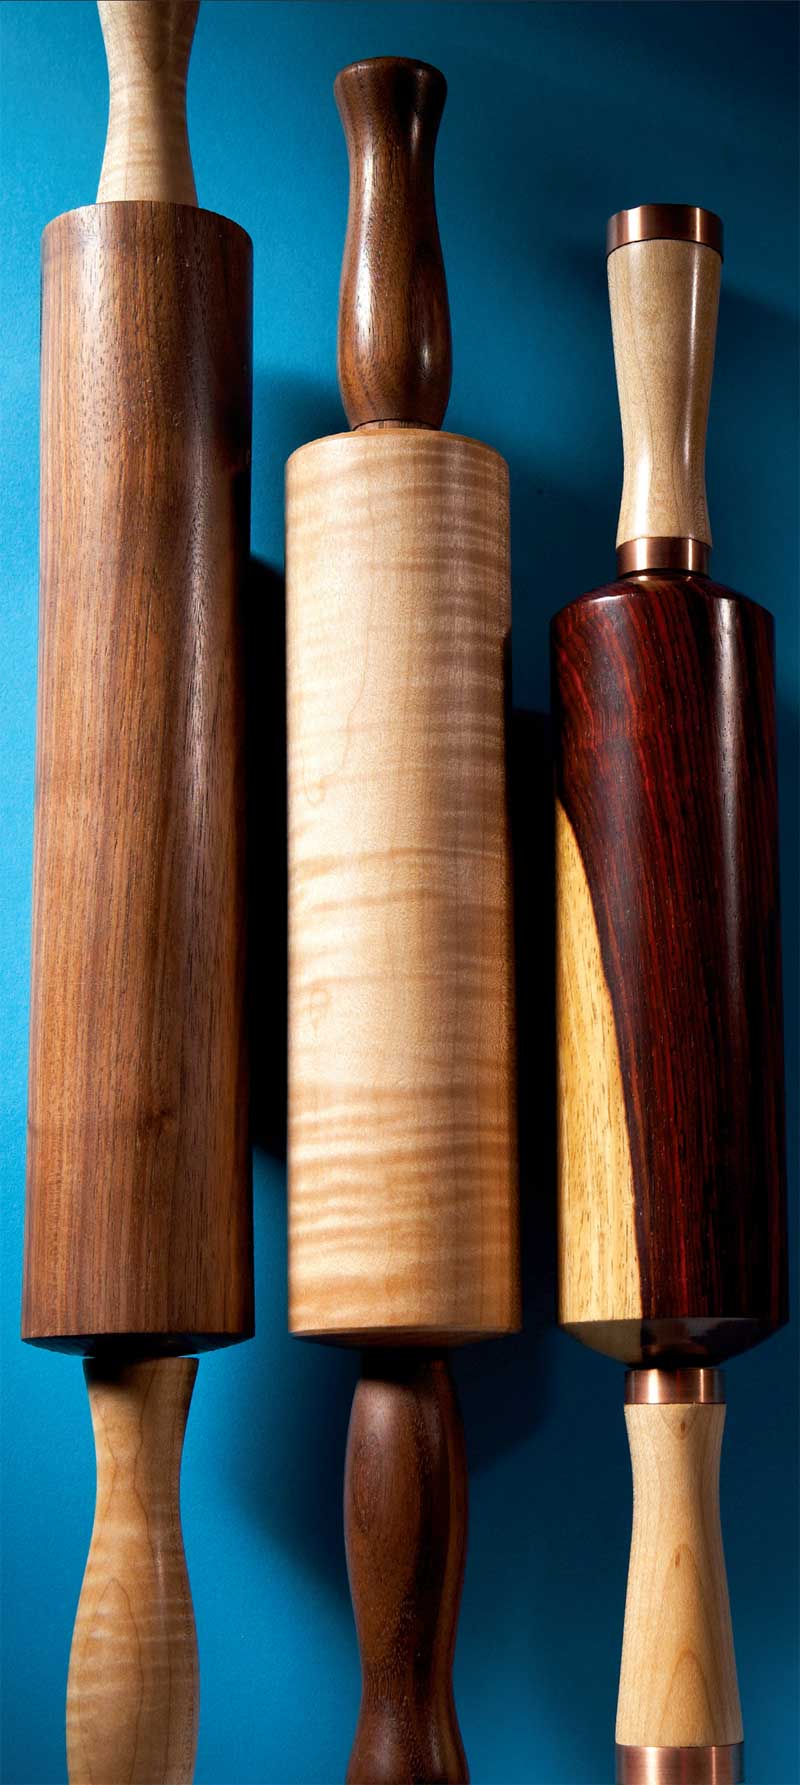 Tims Rolling Pins - Popular Woodworking Magazine